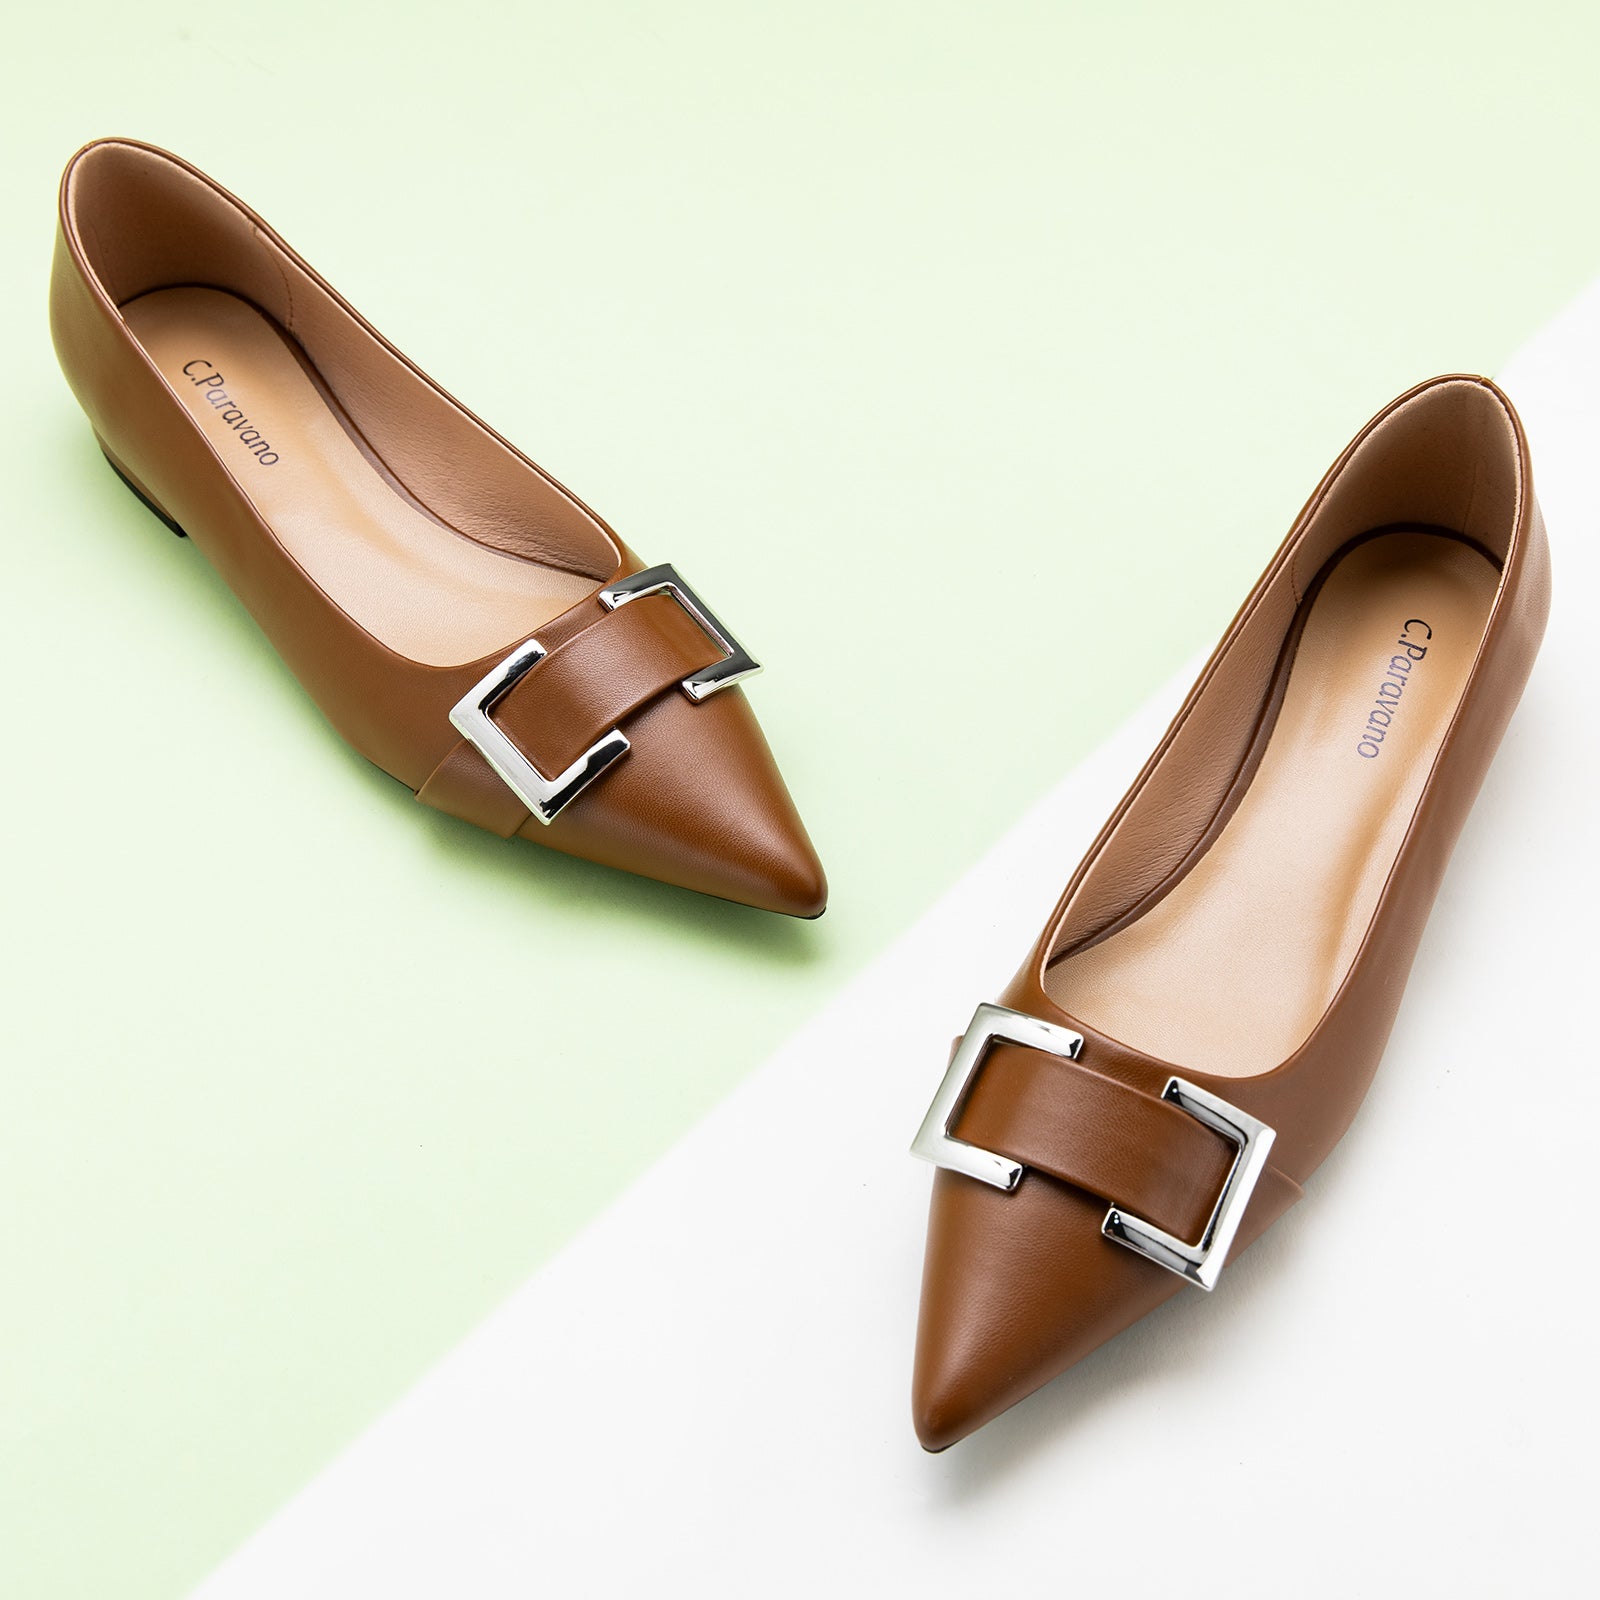 Brown Flats with a stylish Metal Buckle and Pointed Toe, perfect for a confident and fashionable look in any urban setting